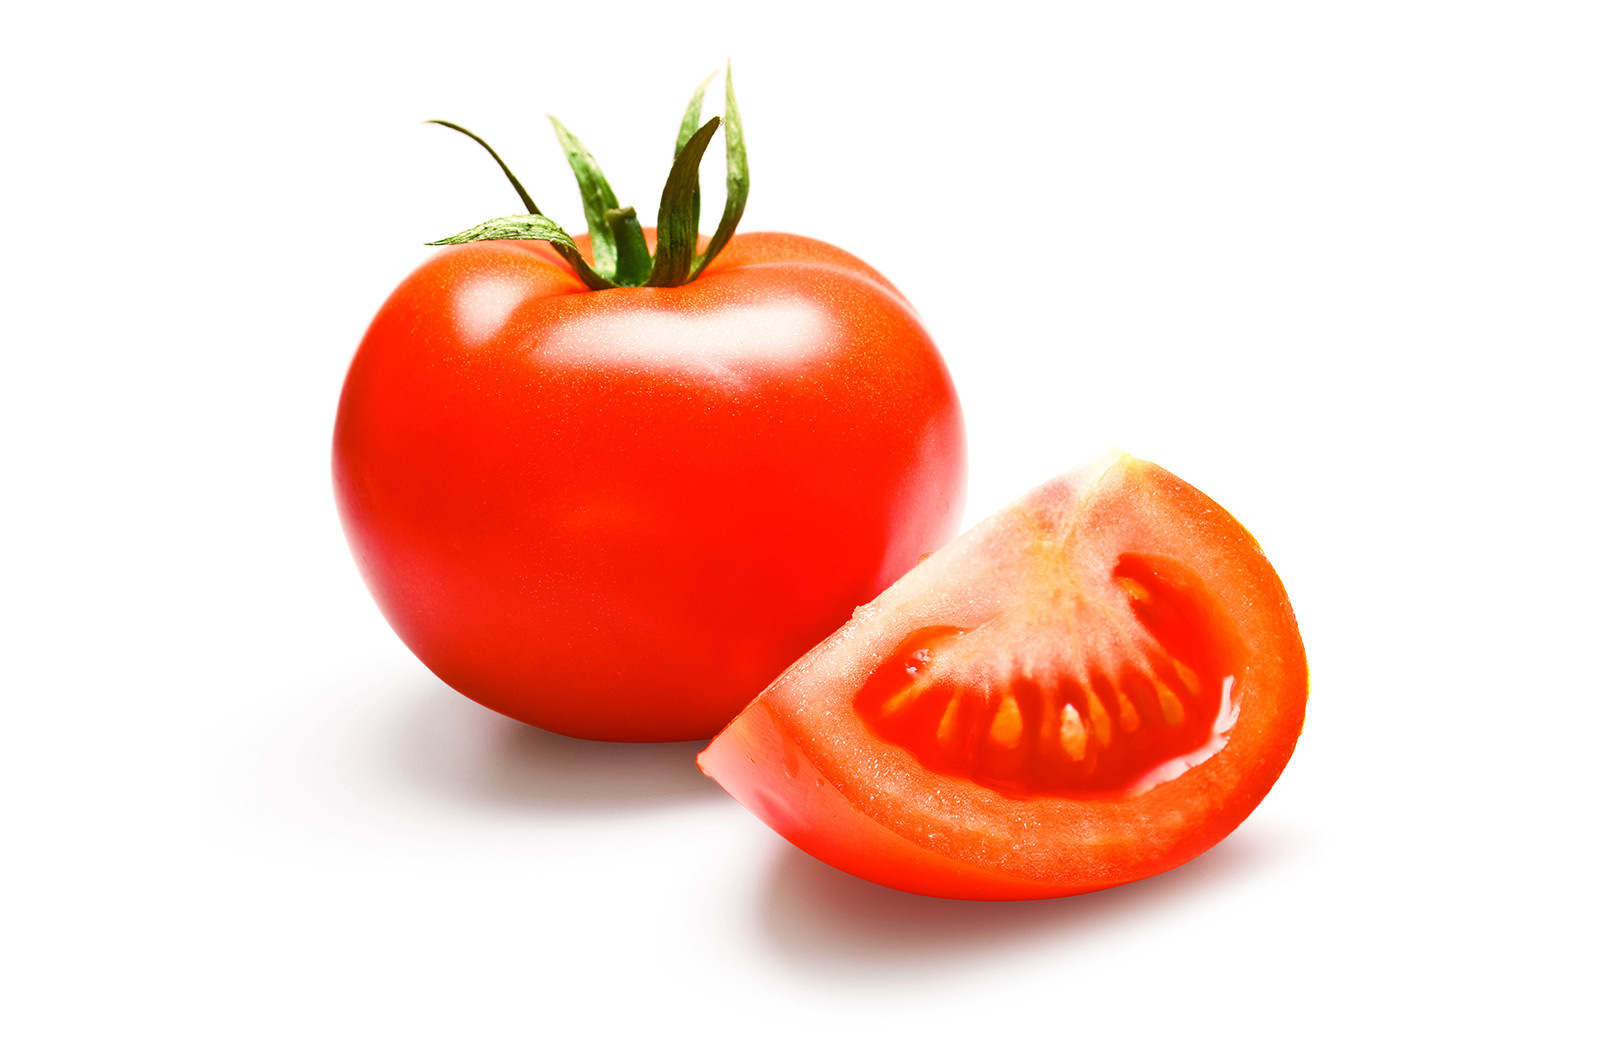 Image of tomato - fruit or vegetable?